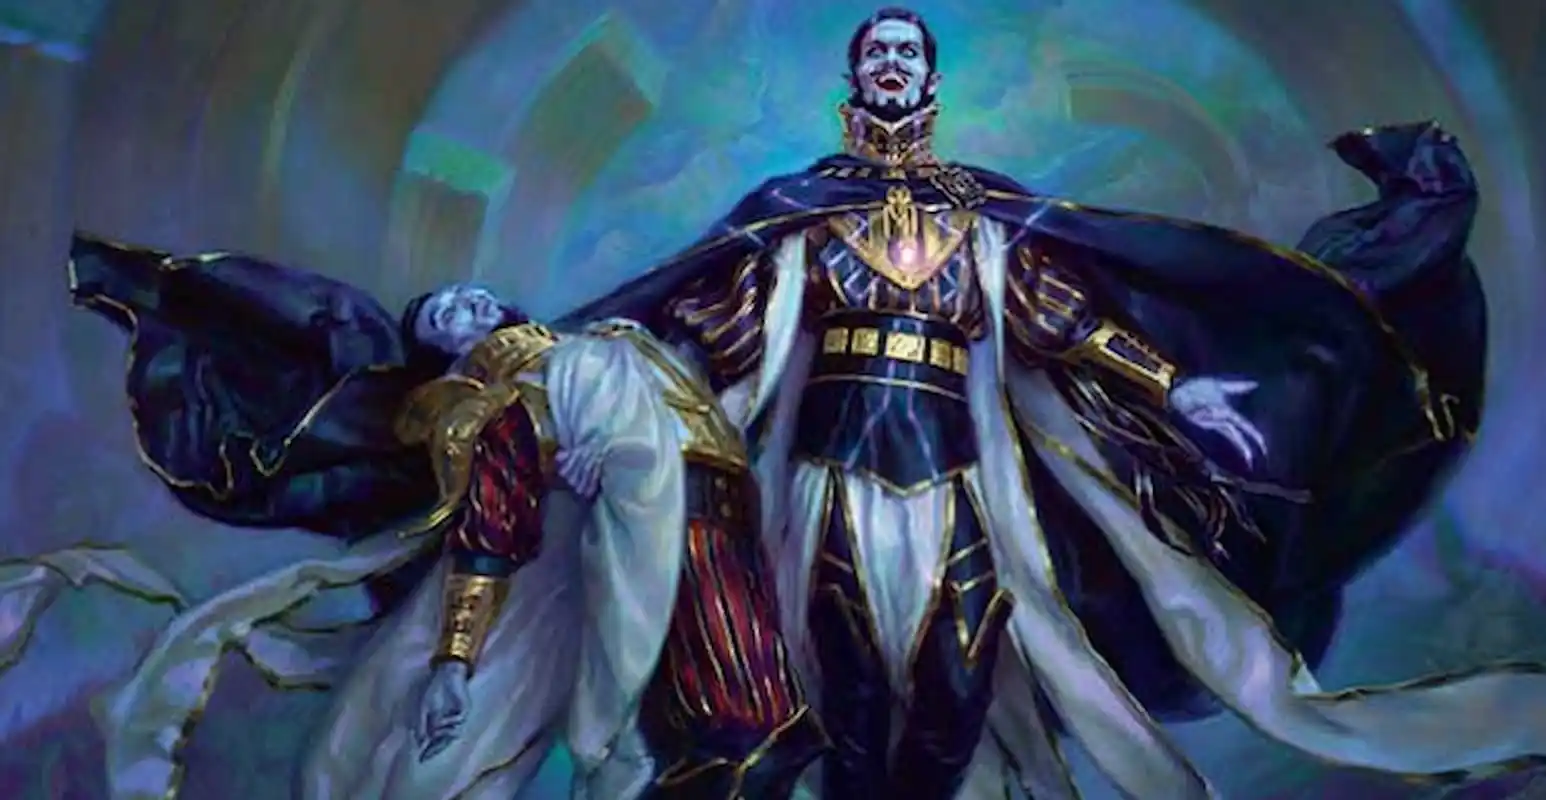 Image of Vito vampire holding a victim in arms floating above ground on MTG card in LCI set